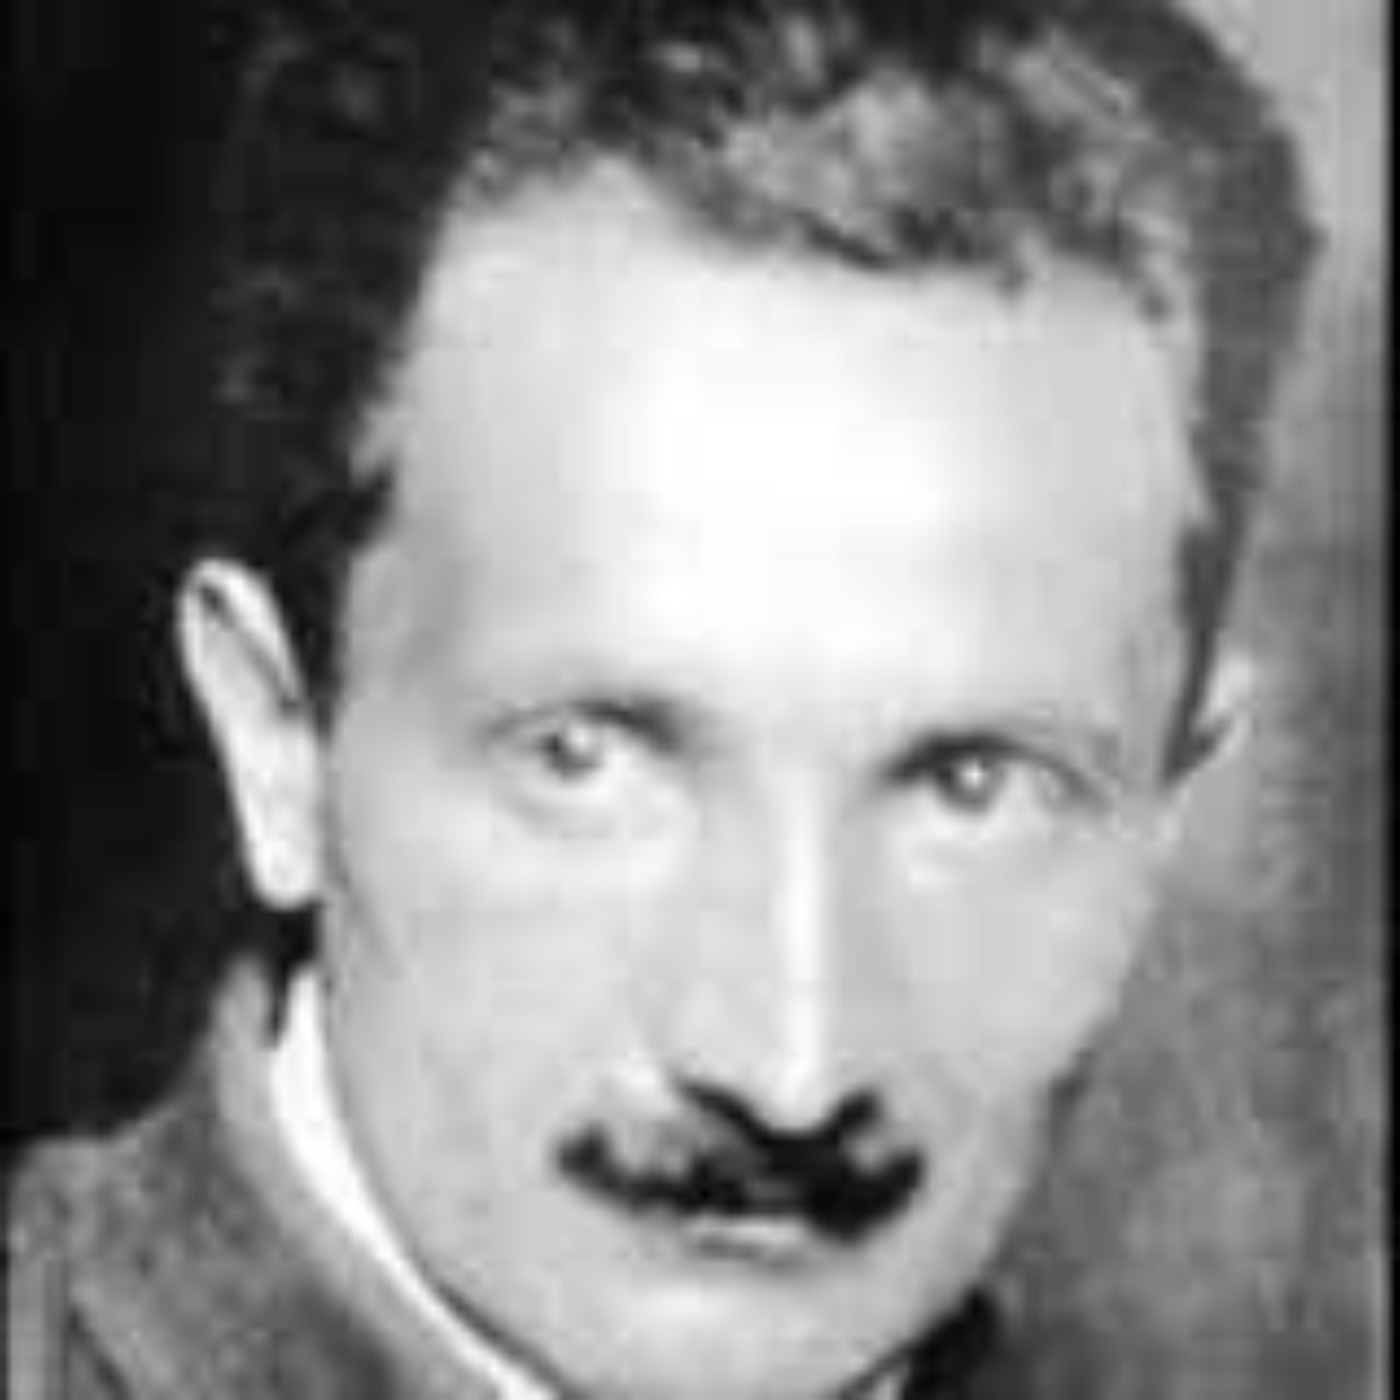 Lecture 8 - Heidegger on the Time of History